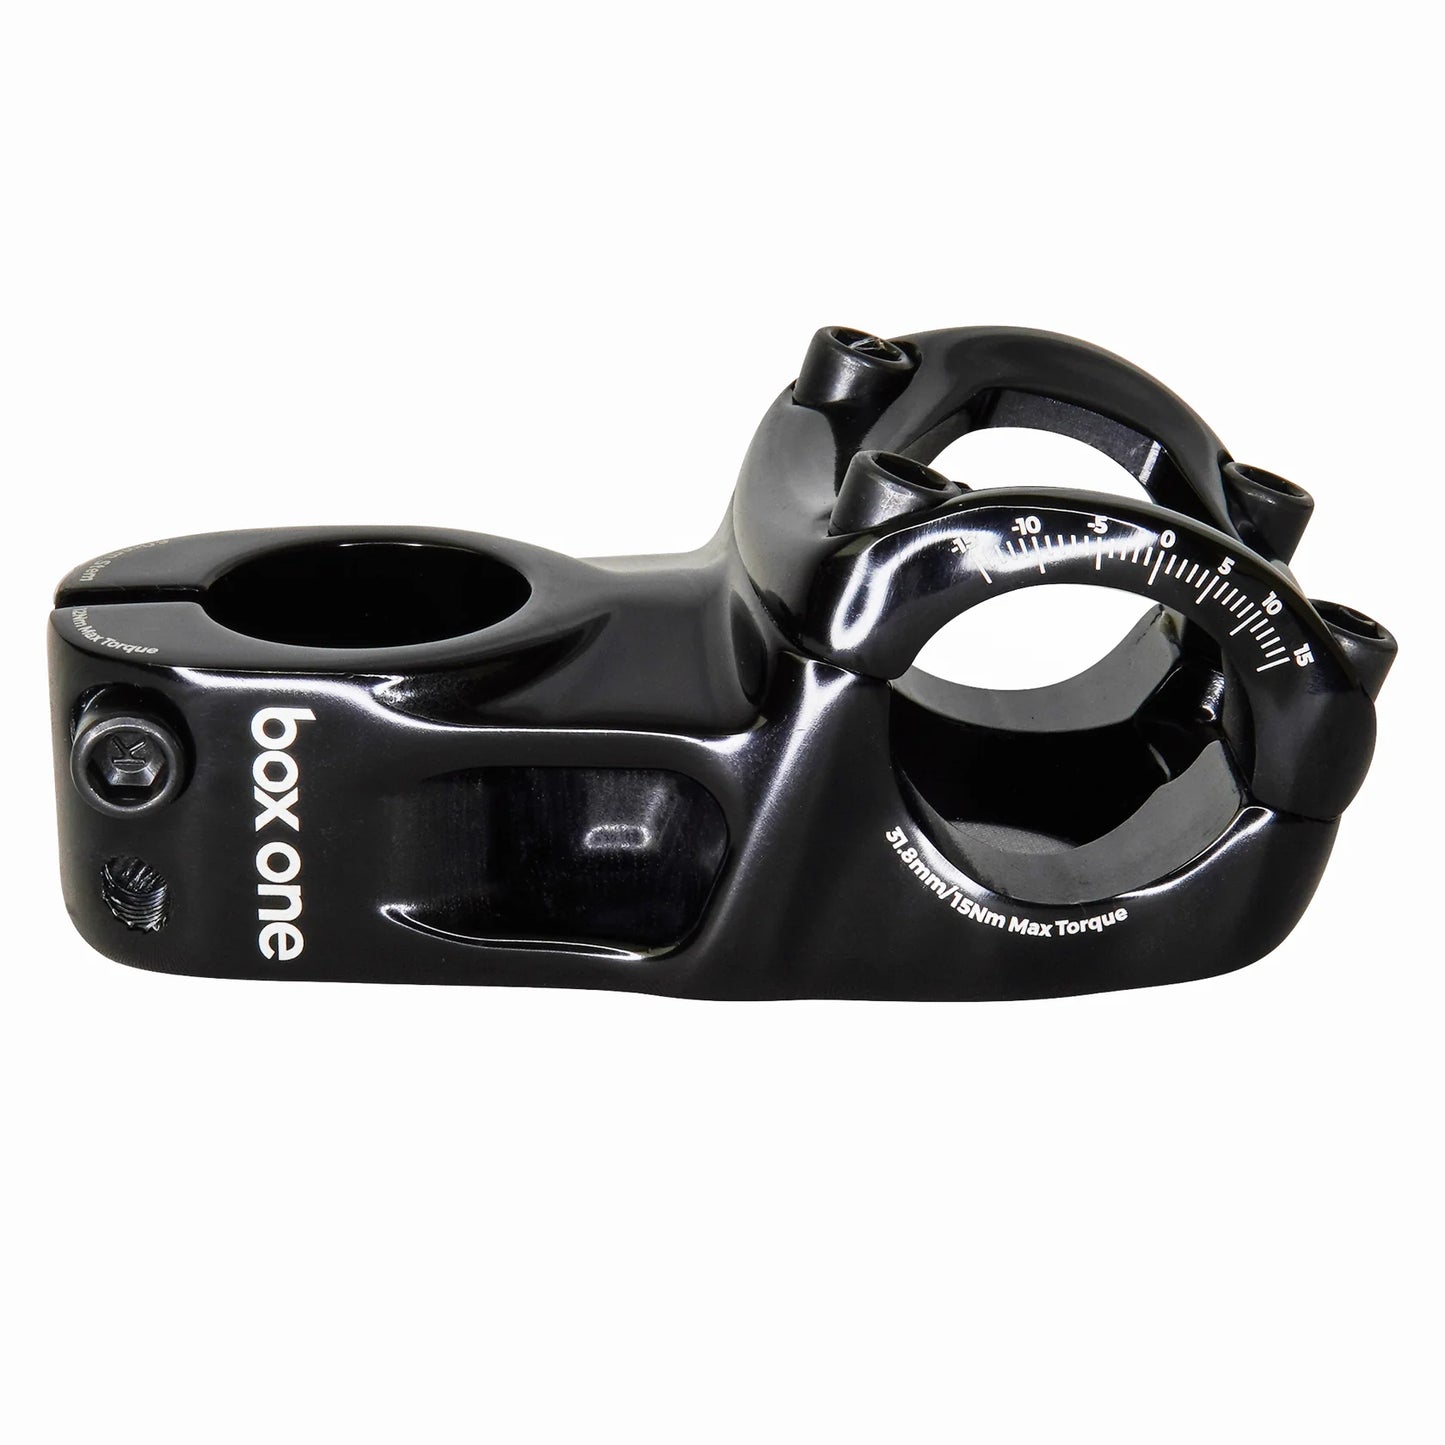 BOX One Oversized 31.8 x 1-1/8th Top Load Stem